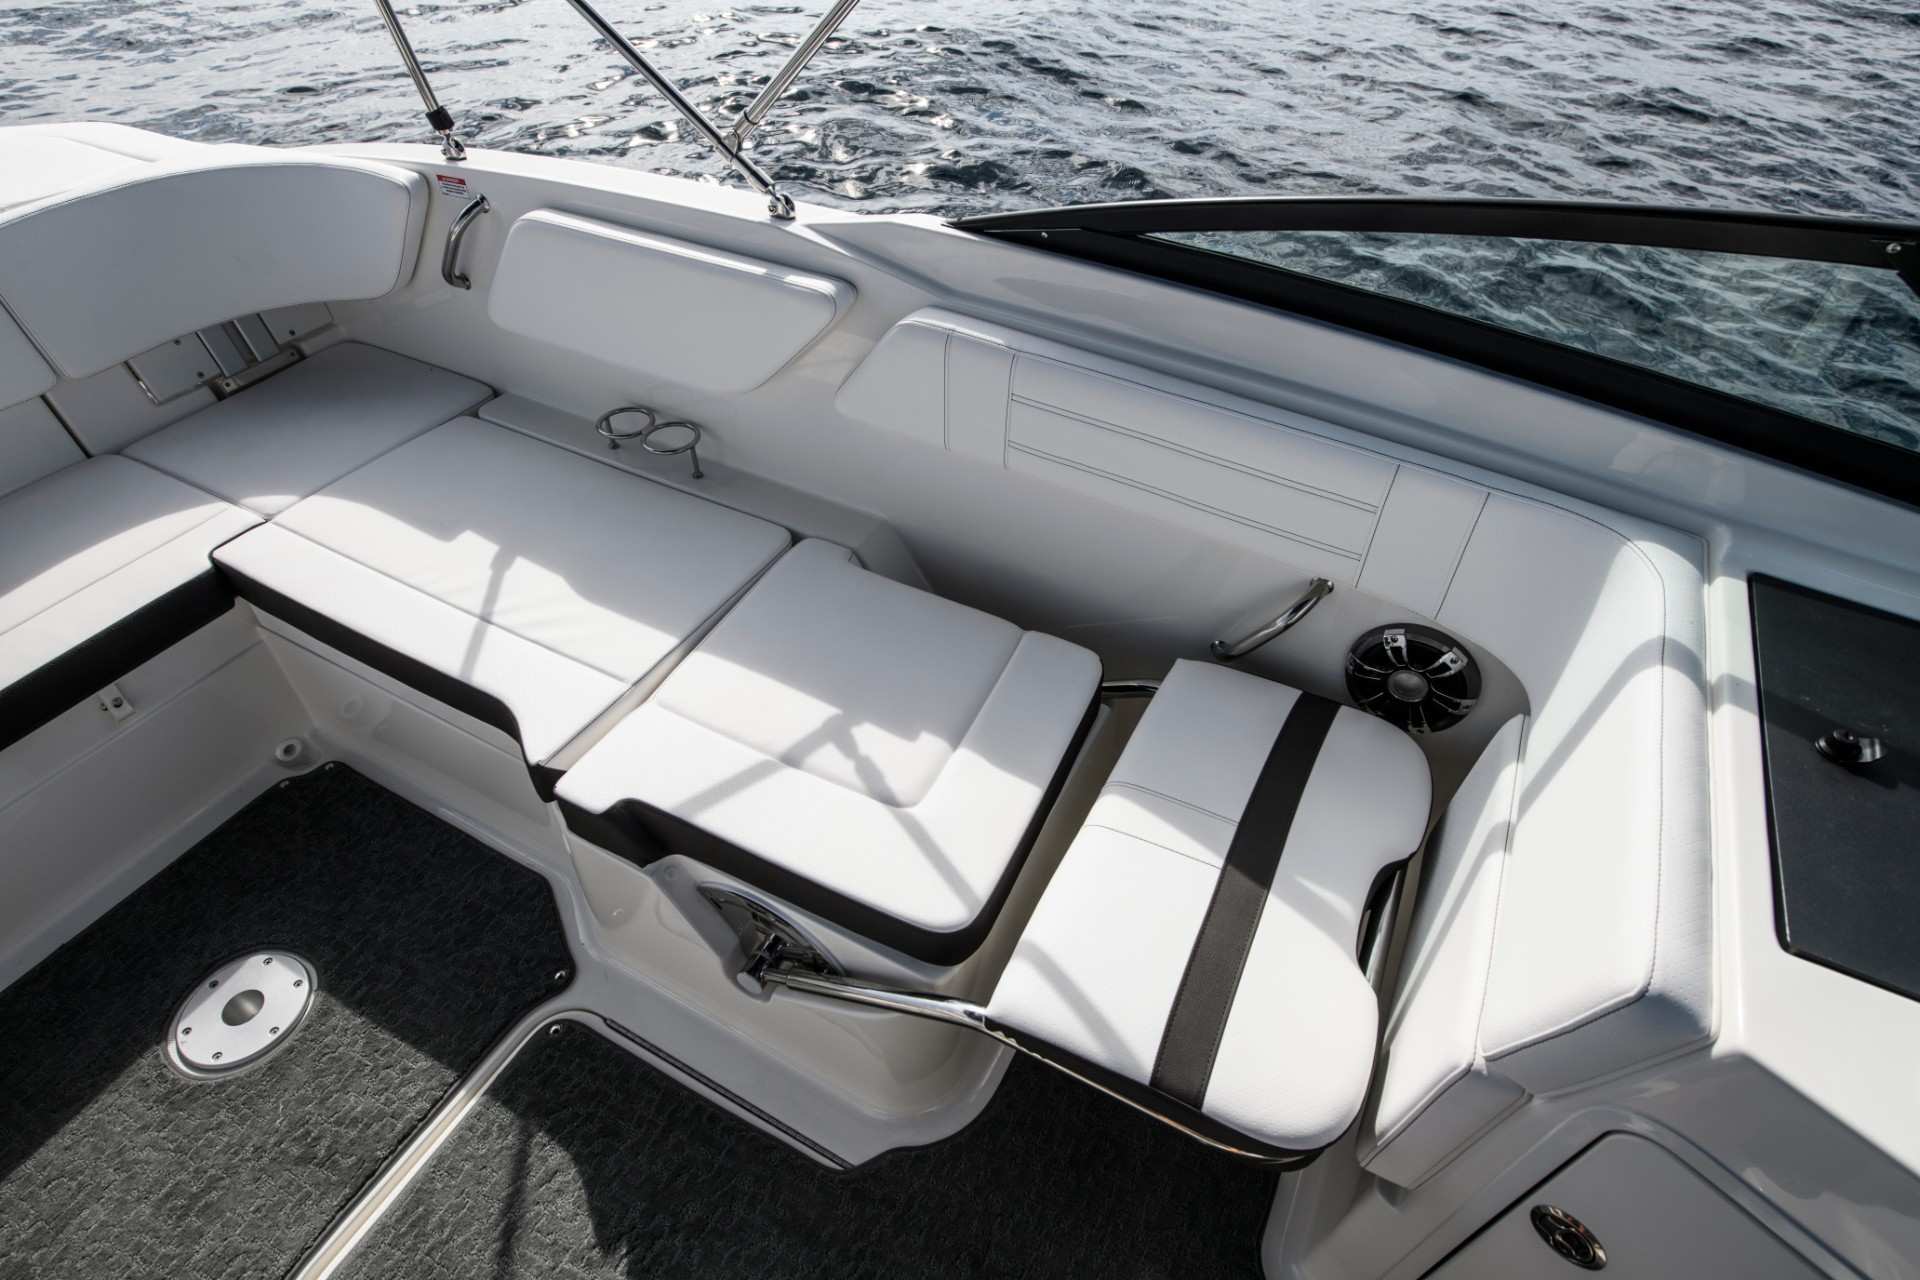 SPX 210 Outboard Europe port seat